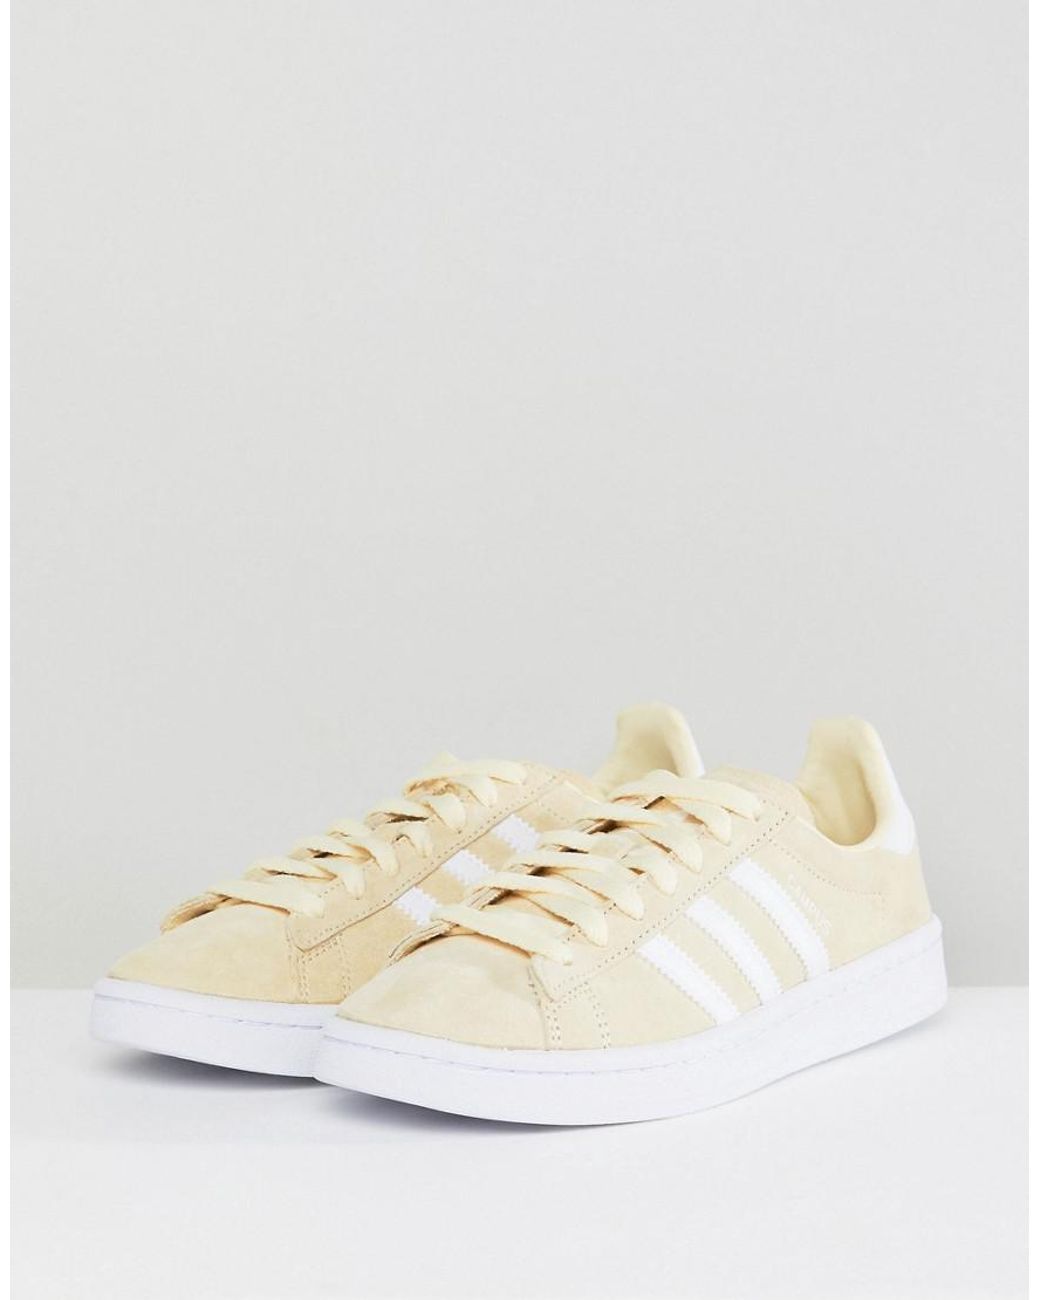 Messing tale saltet adidas Originals Campus Trainers in Yellow | Lyst